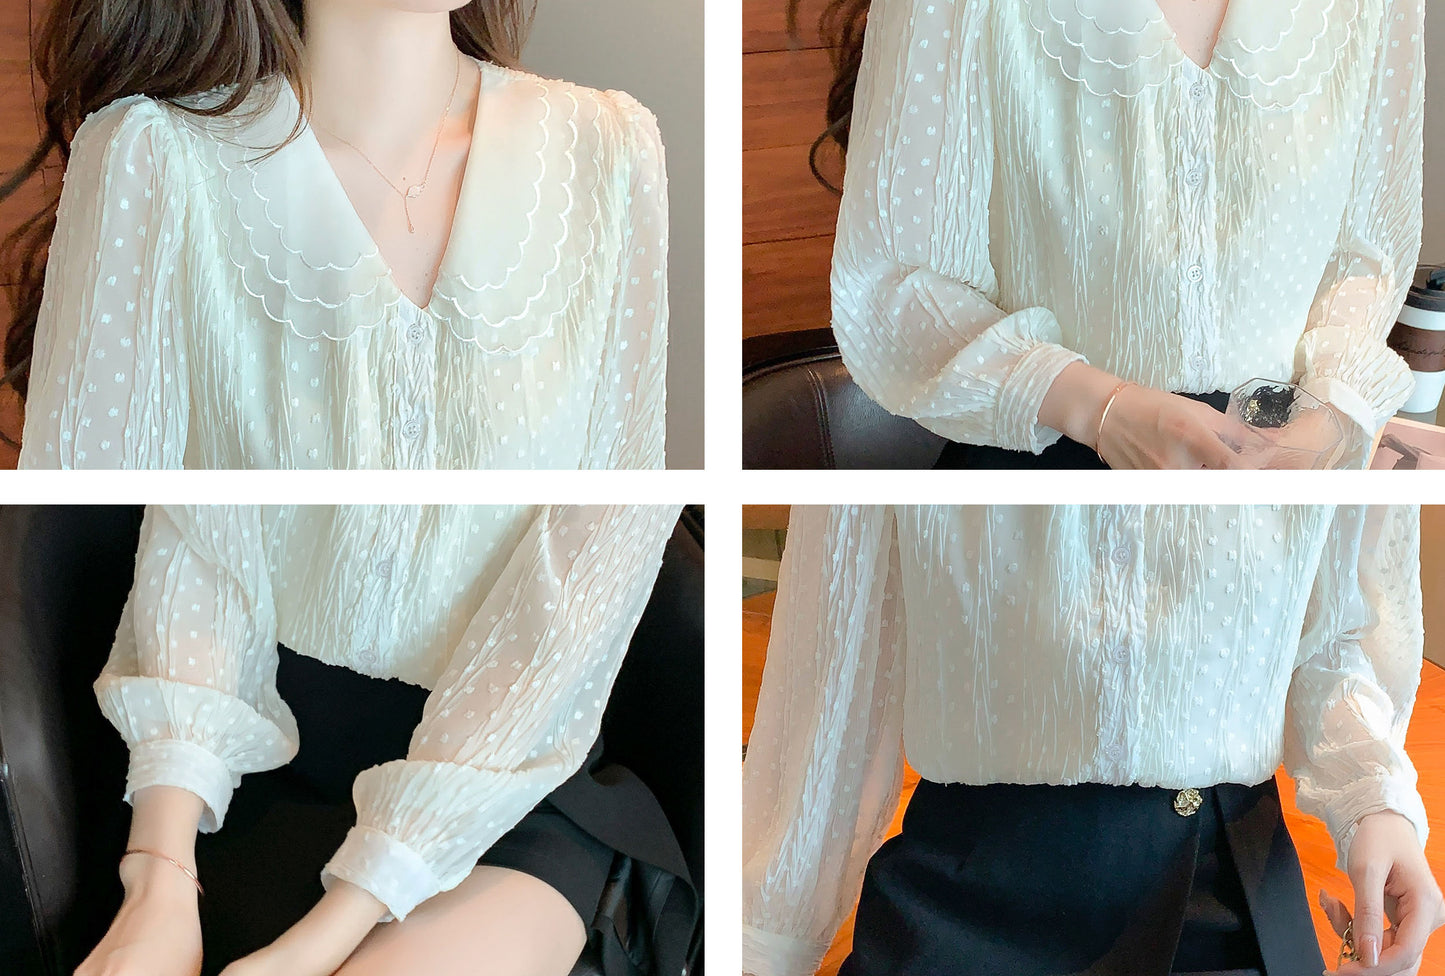 White Solid Lace Doll collar Long Sleeve Button-Front Frill Trim Blouse